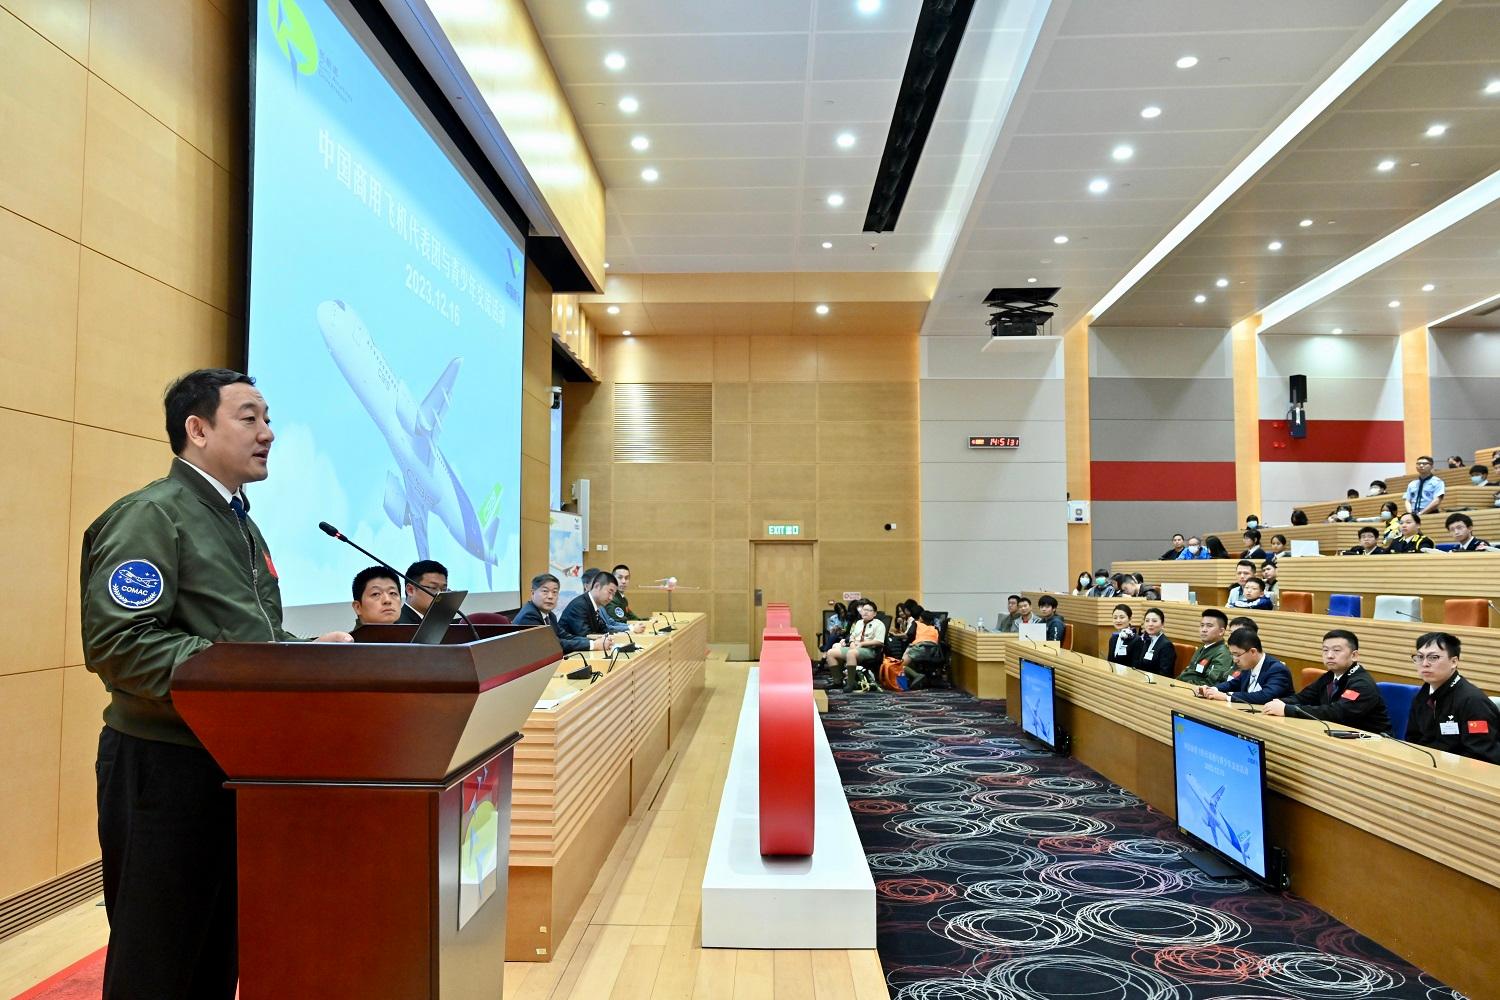 The flight demonstration of home-grown aircraft C919 concluded successfully this morning (December 16). After the flight demonstration, representatives from the Commercial Aircraft Corporation of China, Ltd were invited to meet and interact with young people at the Civil Aviation Department Headquarters. Photo shows Chief Flight Operation Pilot of Commercial Aircraft Corporation of China, Ltd, Captain Tong Yu (first left), addressing the sharing session and encouraging young people attending the event to be courageous in pursuing their dreams, and contributing to the advancement of the national scientific and technological progress, as well as the country’s aviation industry development together.